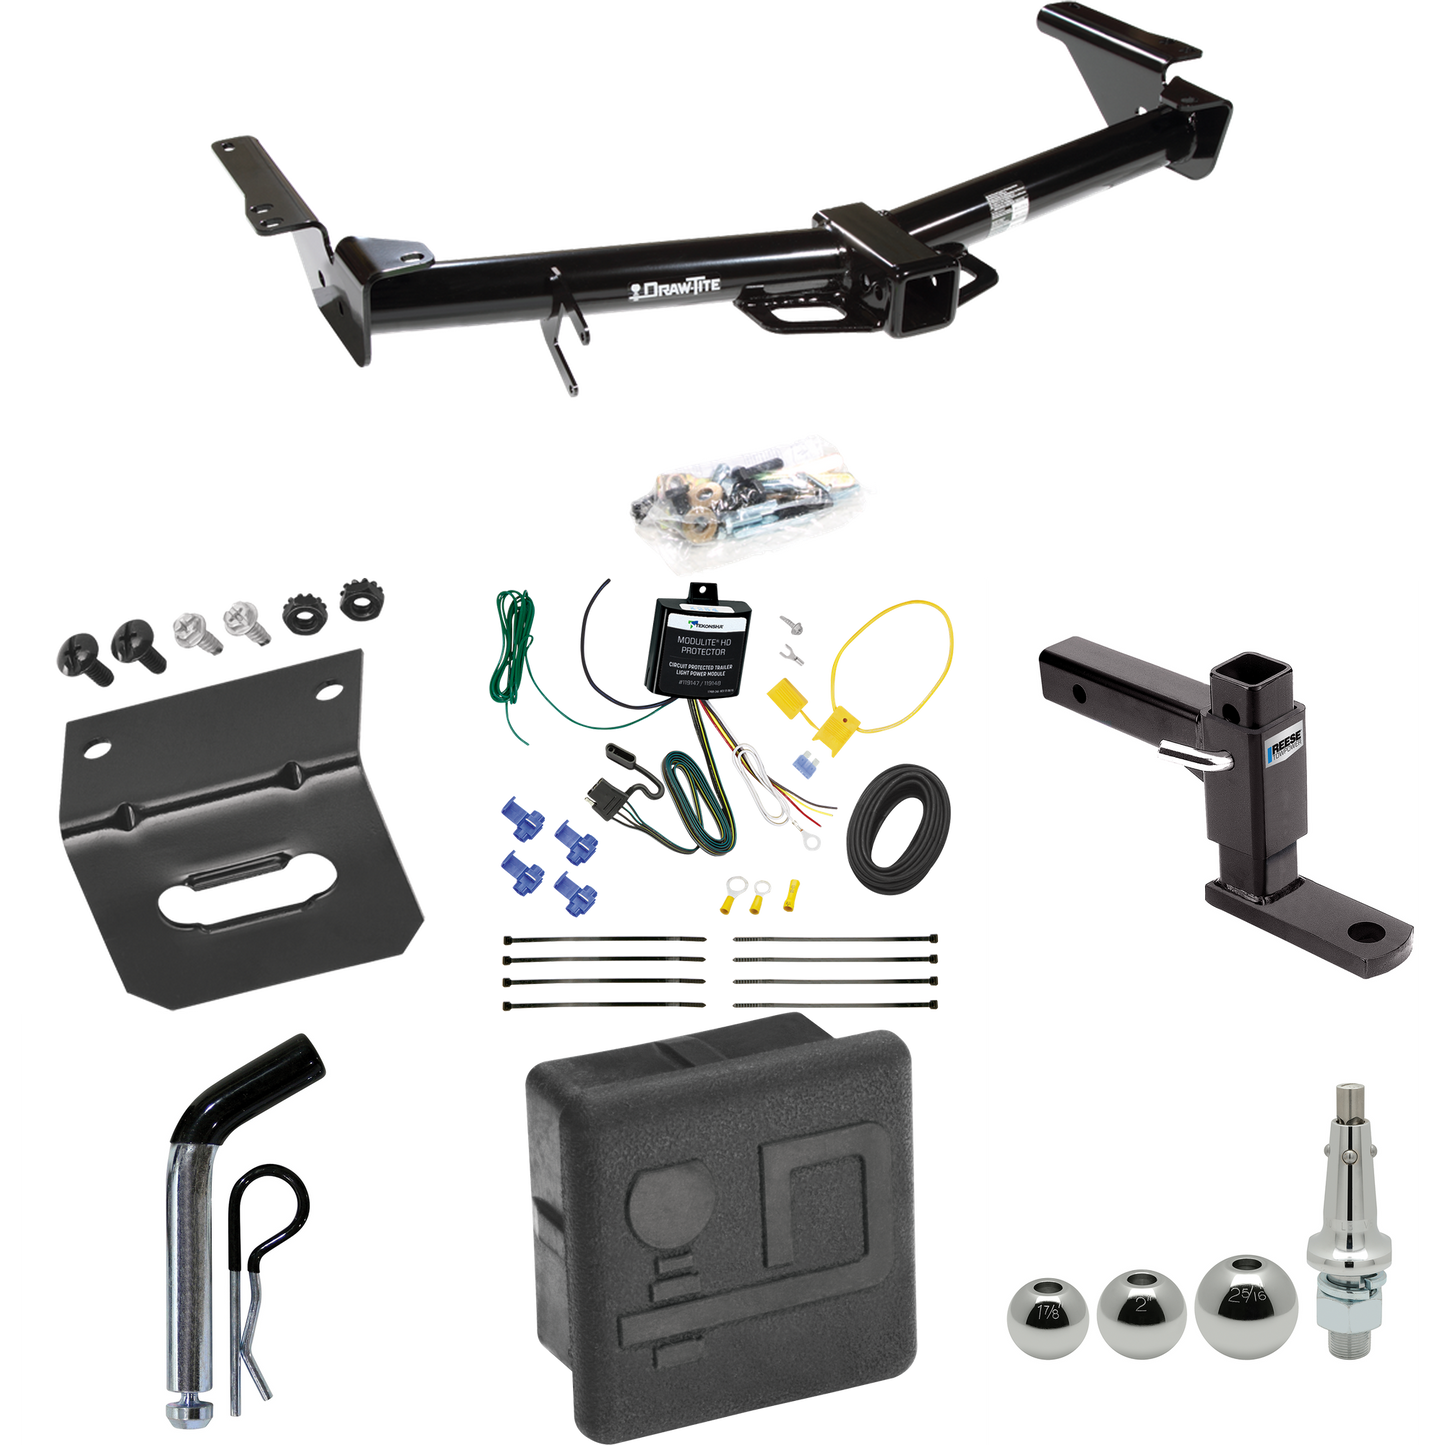 Fits 2003-2009 Lexus GX470 Trailer Hitch Tow PKG w/ 4-Flat Wiring + Adjustable Drop Rise Ball Mount + Pin/Clip + Inerchangeable 1-7/8" & 2" & 2-5/16" Balls + Wiring Bracket + Hitch Cover By Draw-Tite